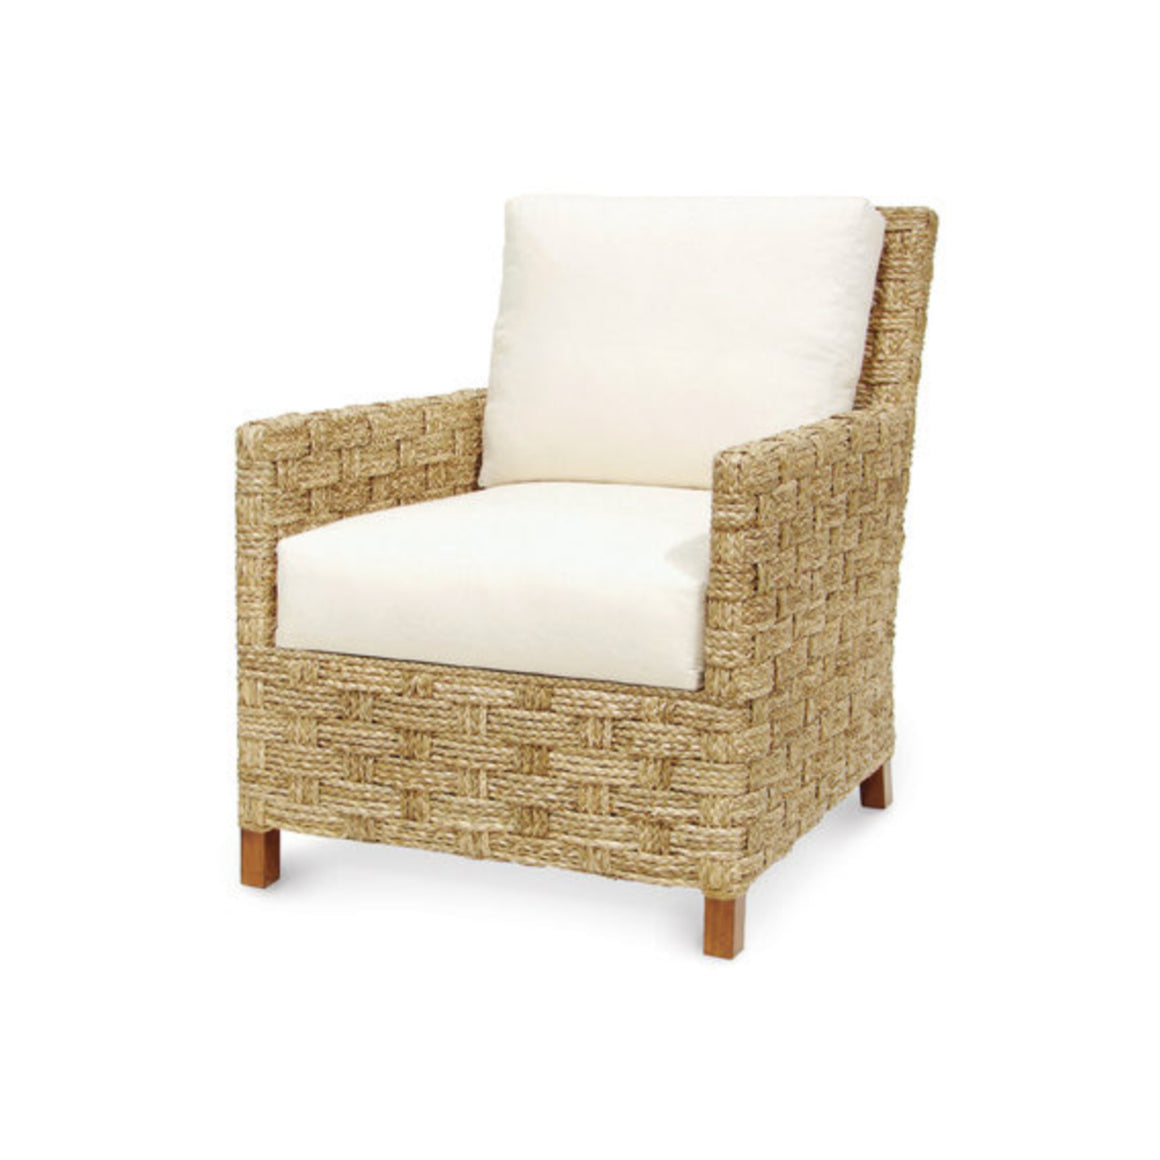 Spa Seagrass Occasional Chair